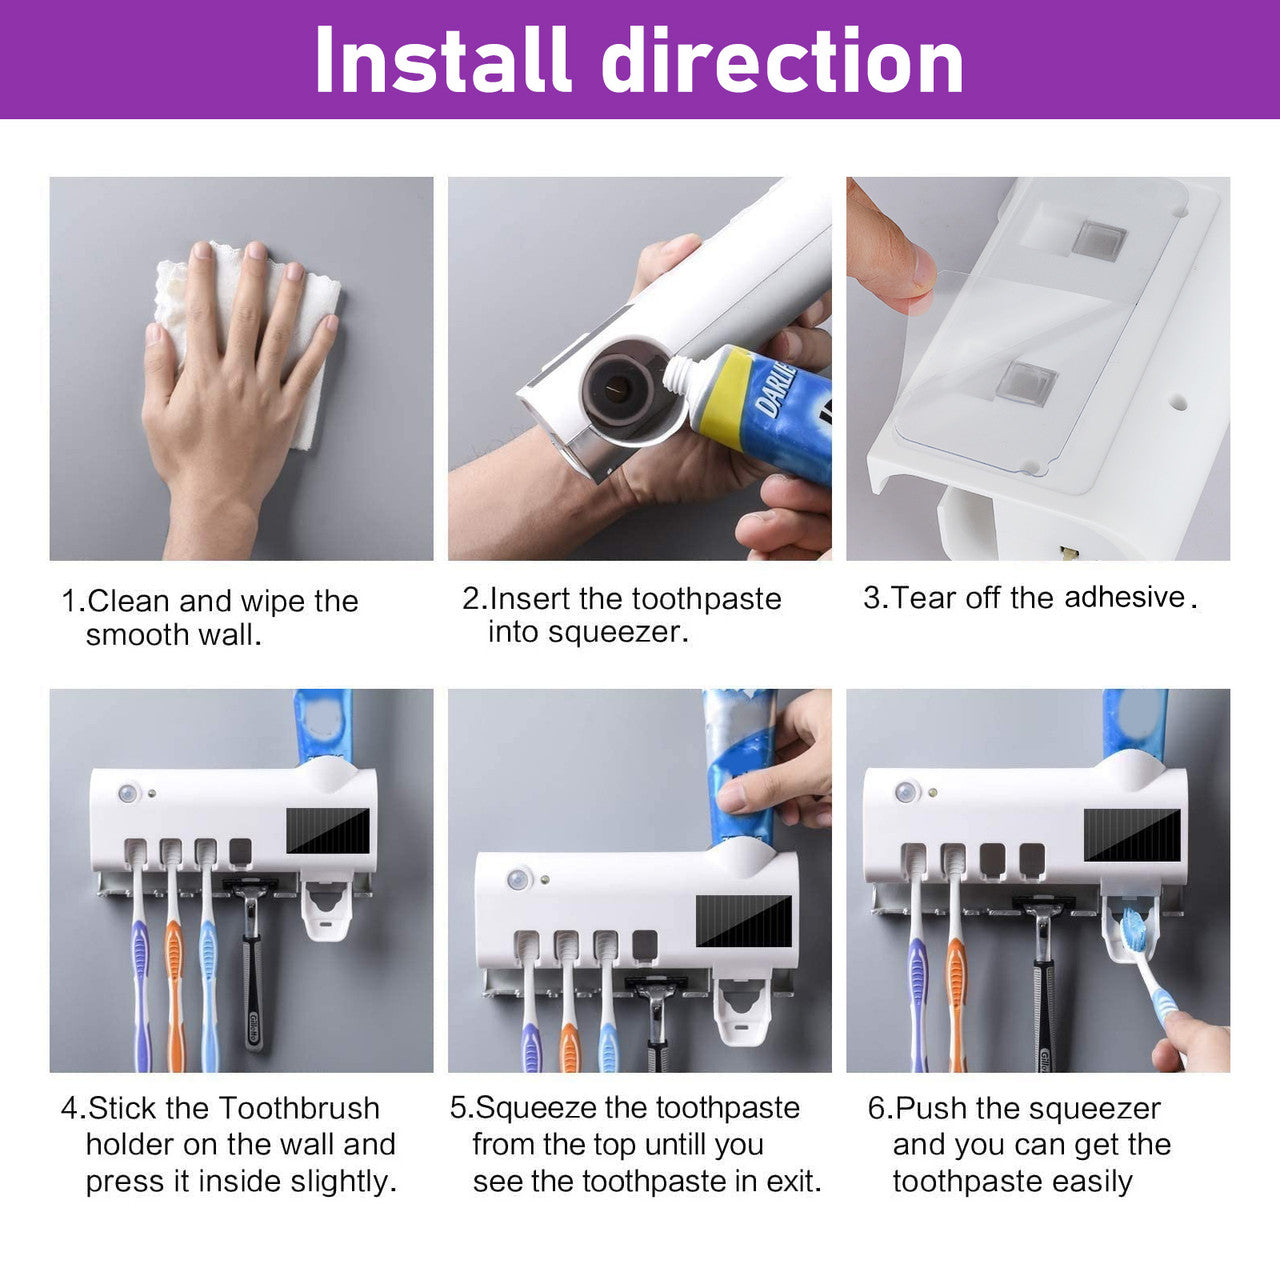 Induction Toothbrush Holder with a Compact and Hollow Design and Multi-Storage Rack